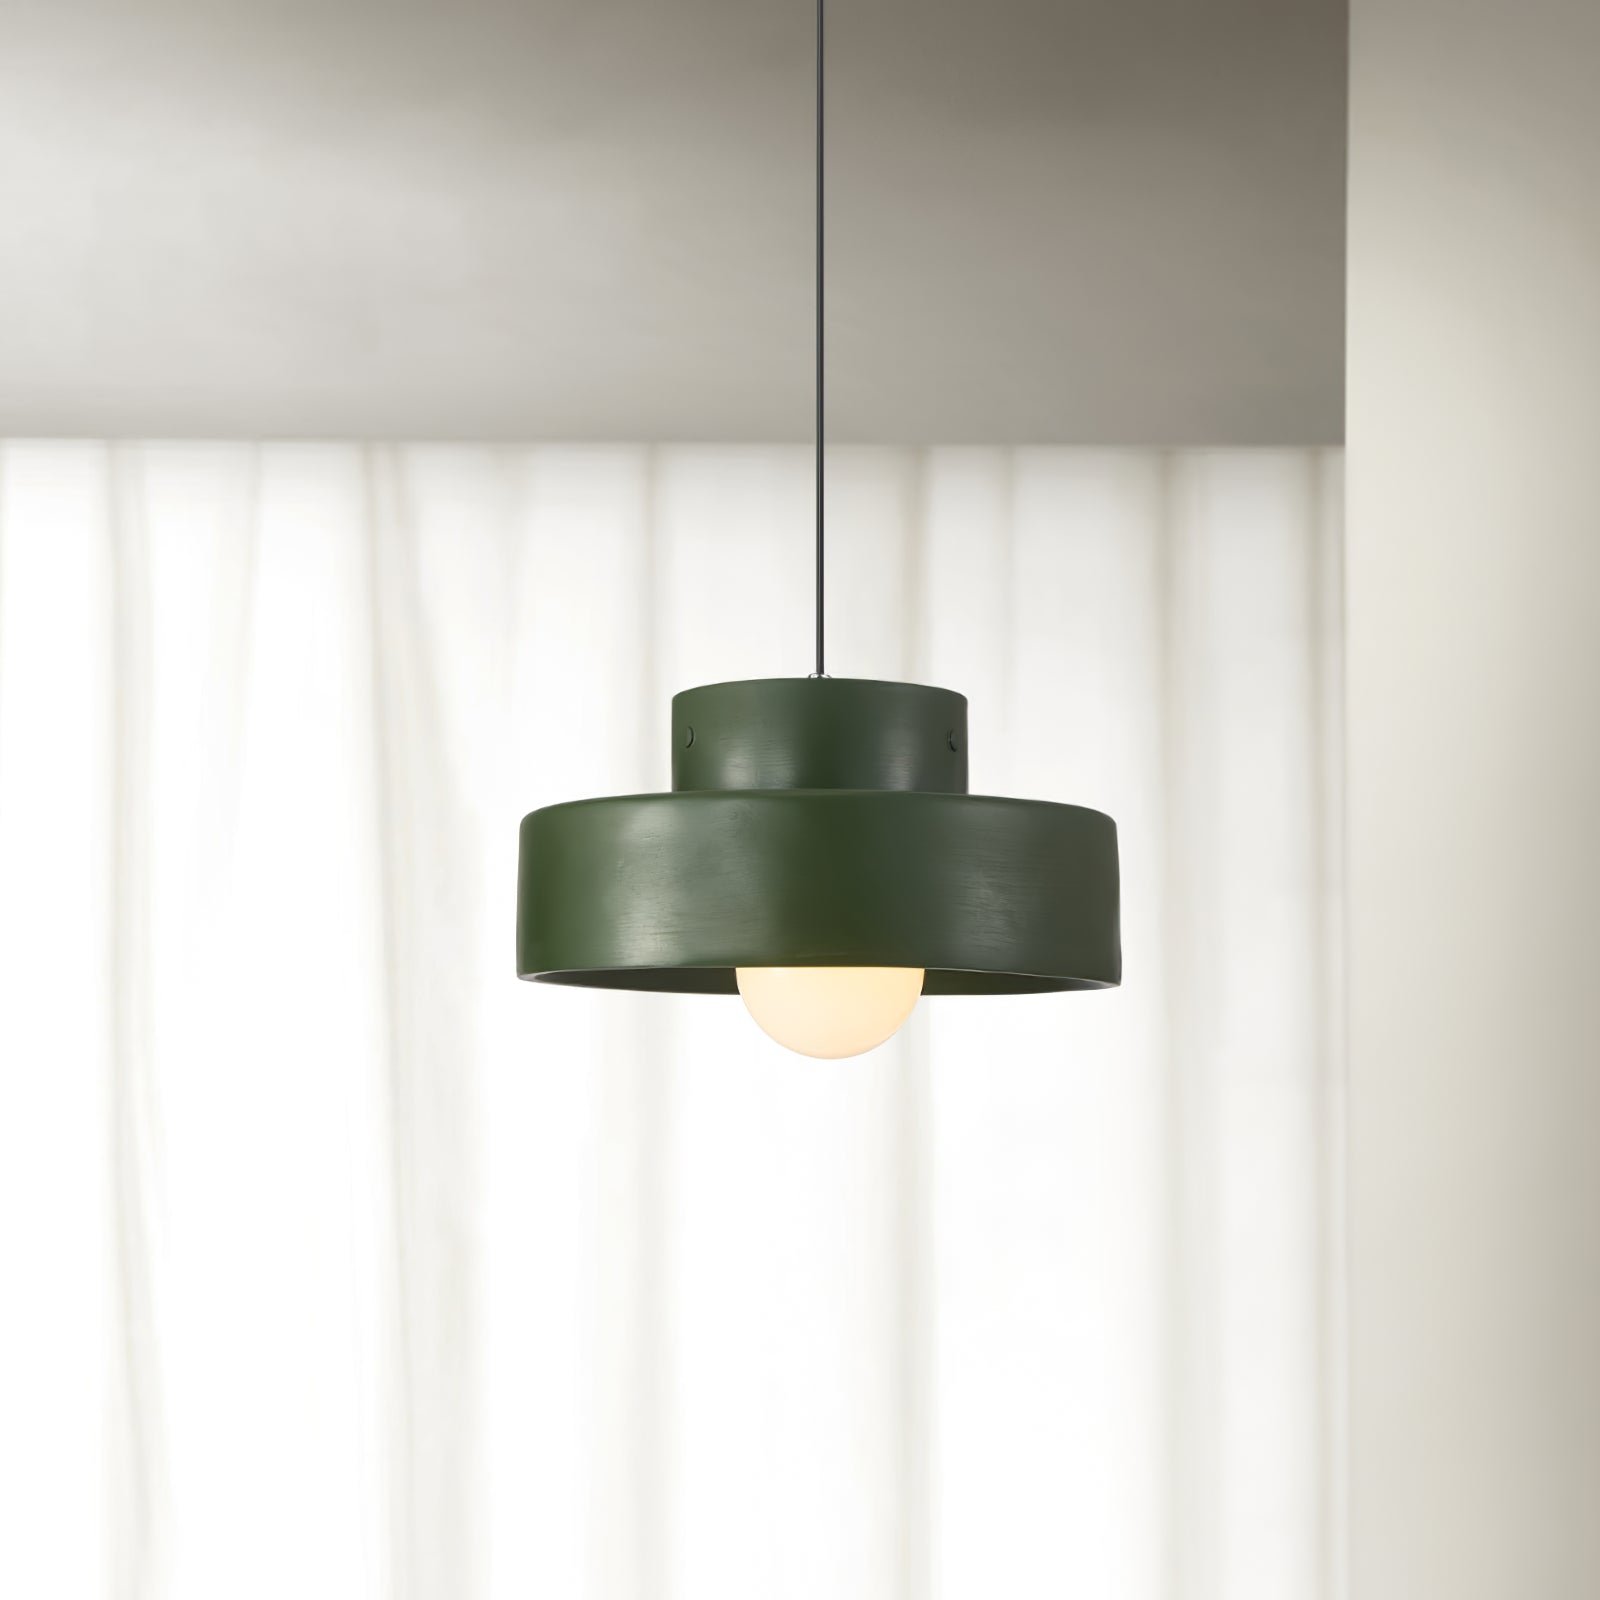 Green Bray Pendant Lamp, with a diameter of 11.8 inches and a height of 5.9 inches (30cm x 15cm).